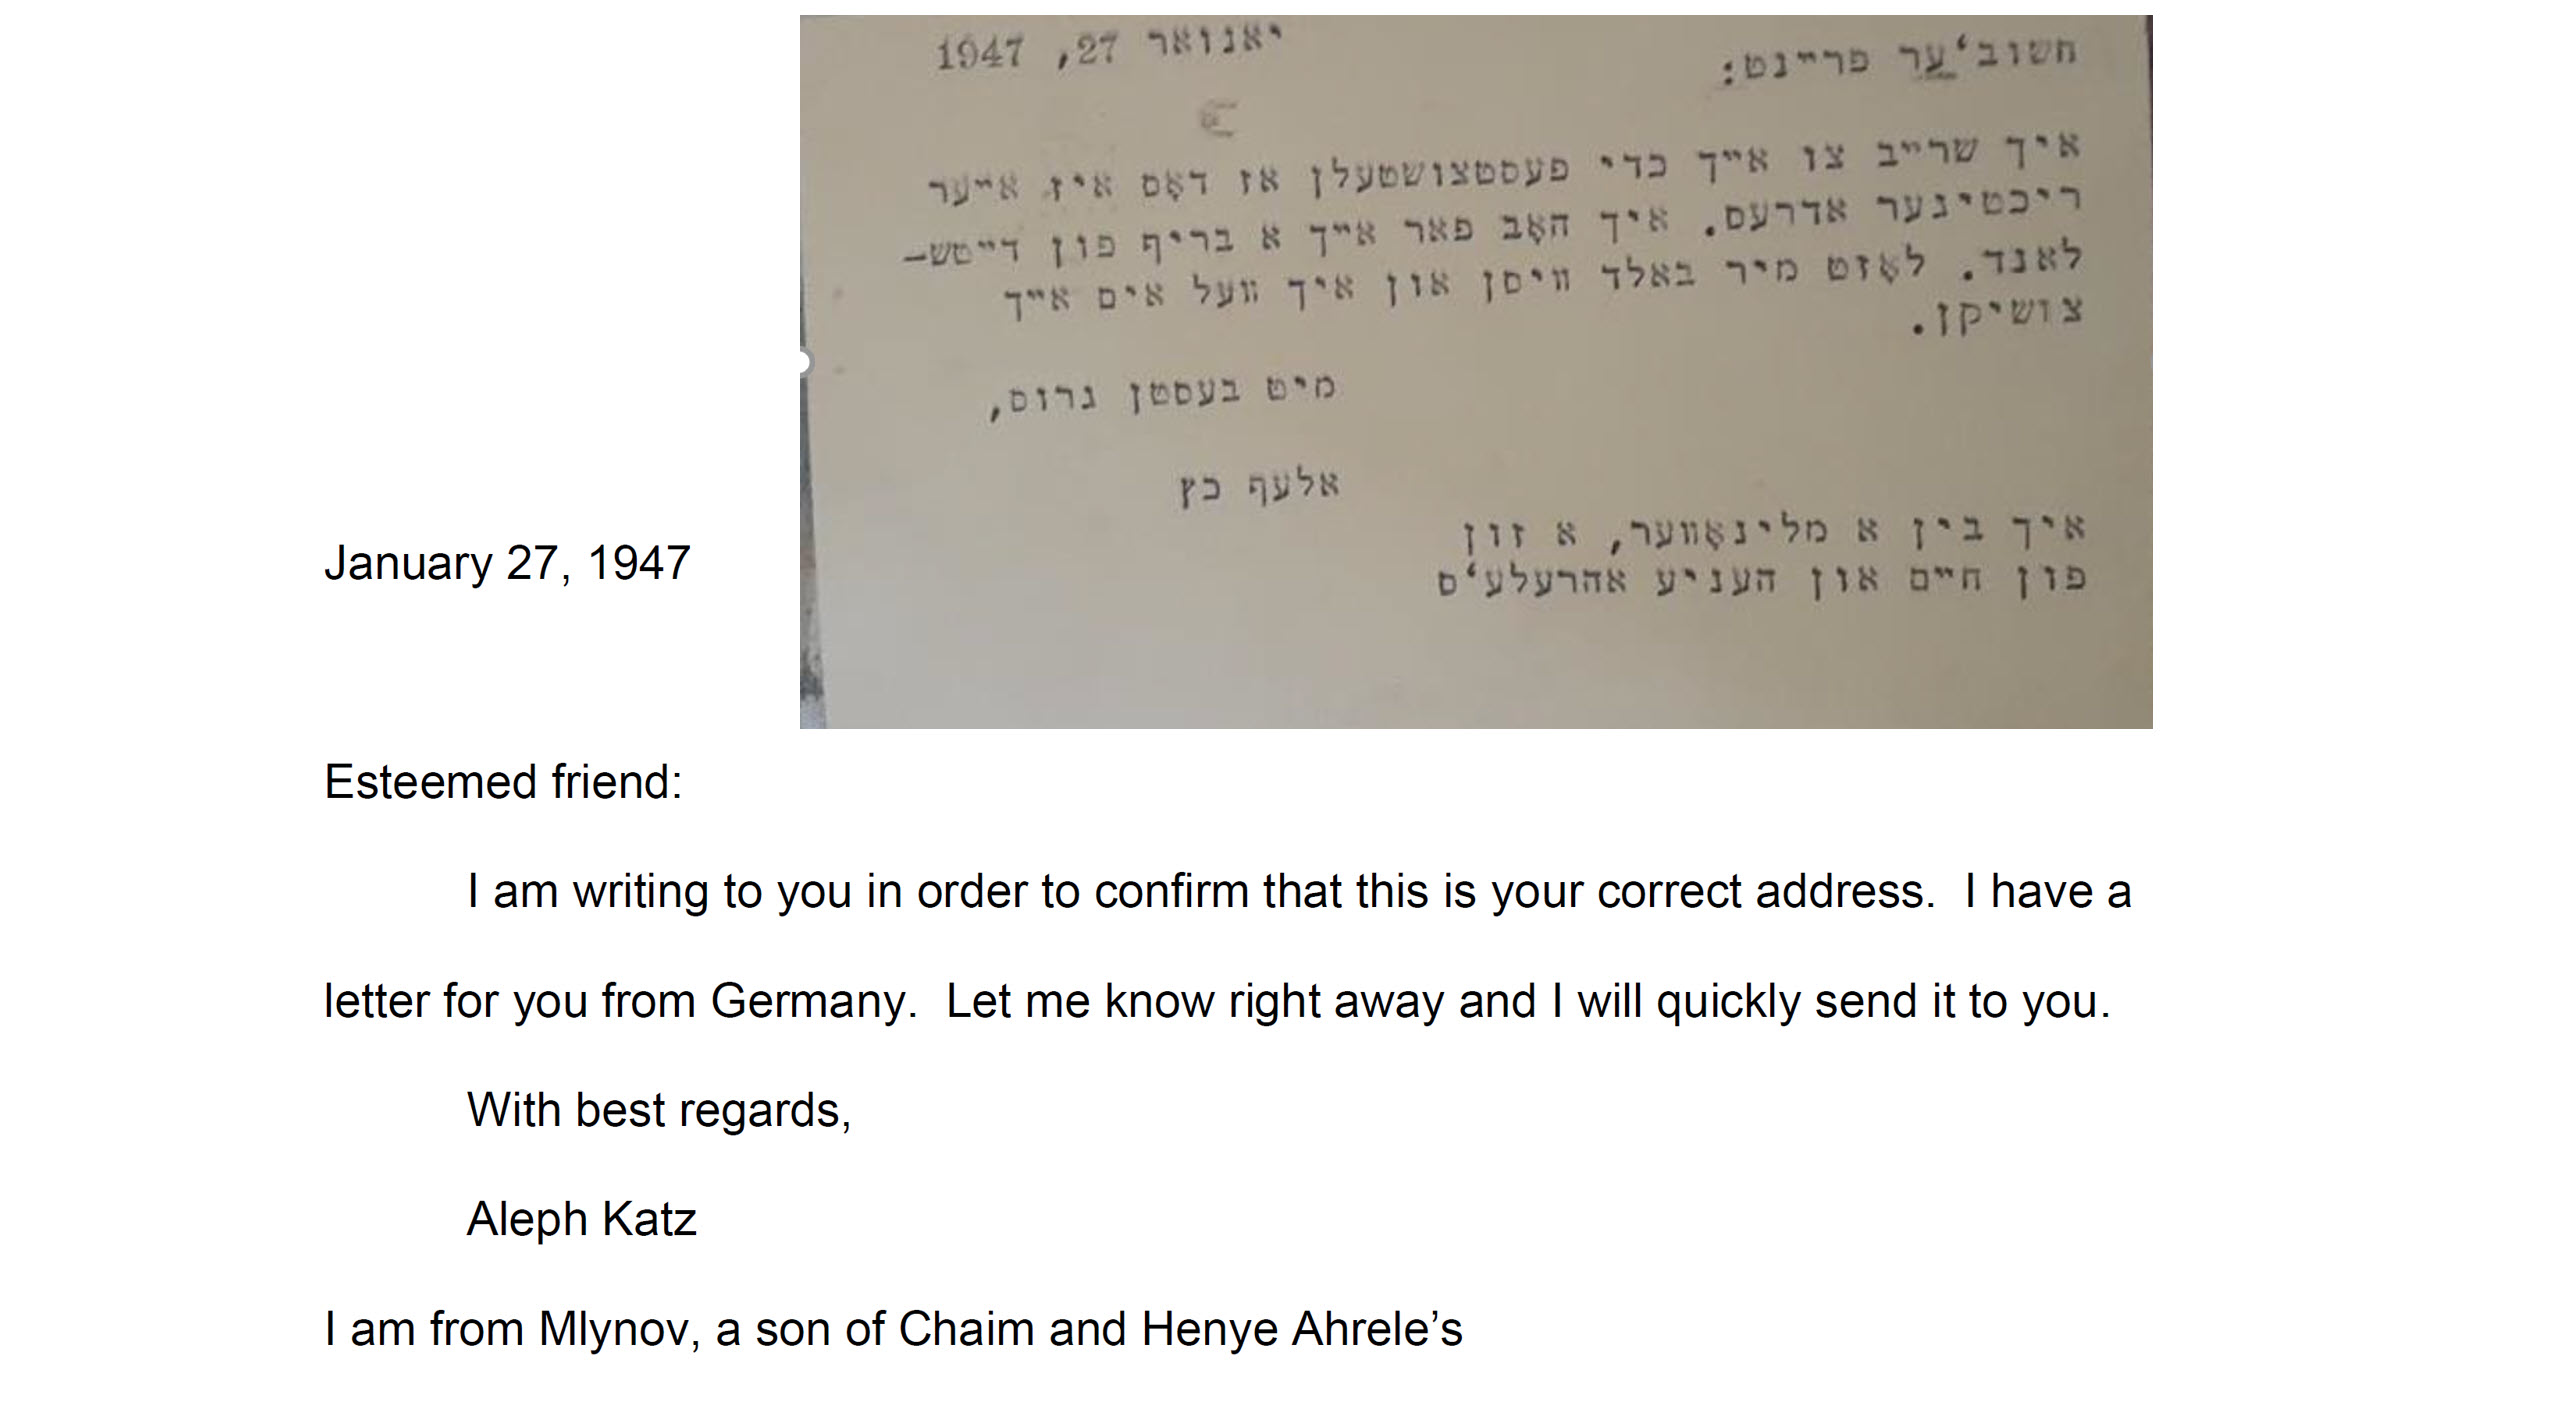 Letter from Aleph Katz